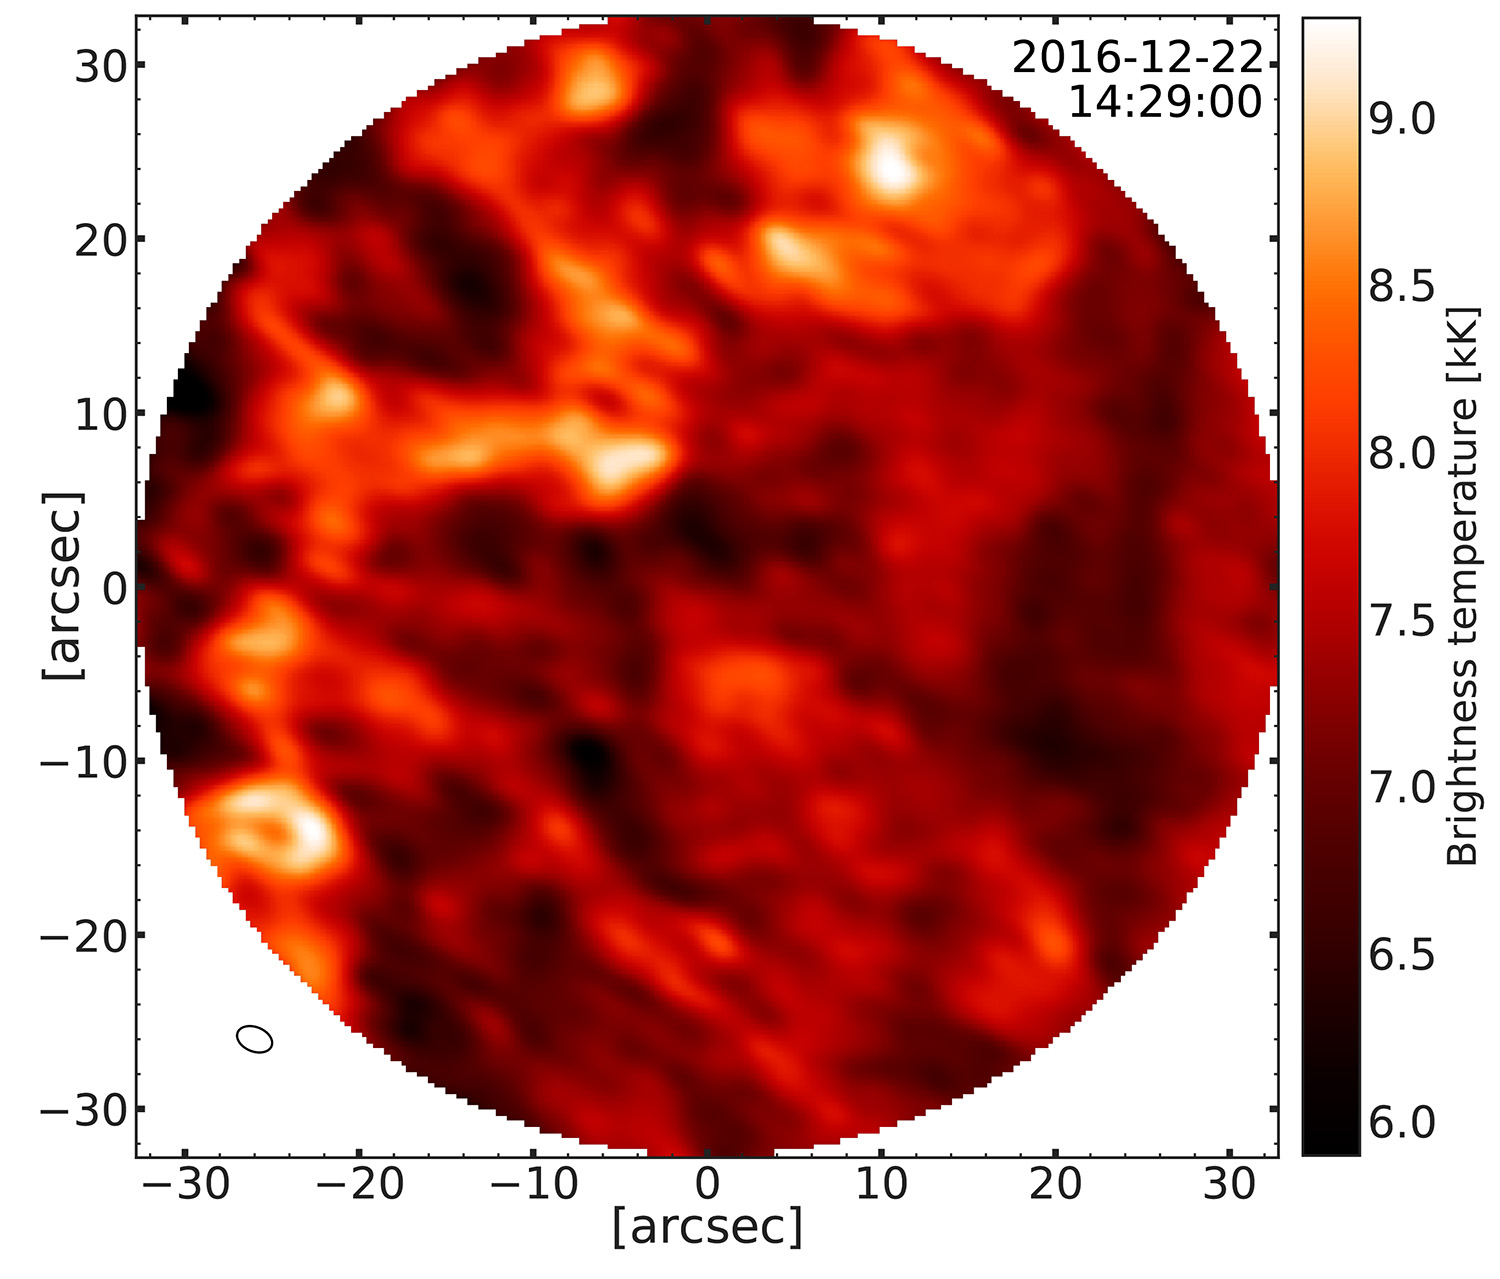 plot showing a real observation of the sun at millimeter wavelengths